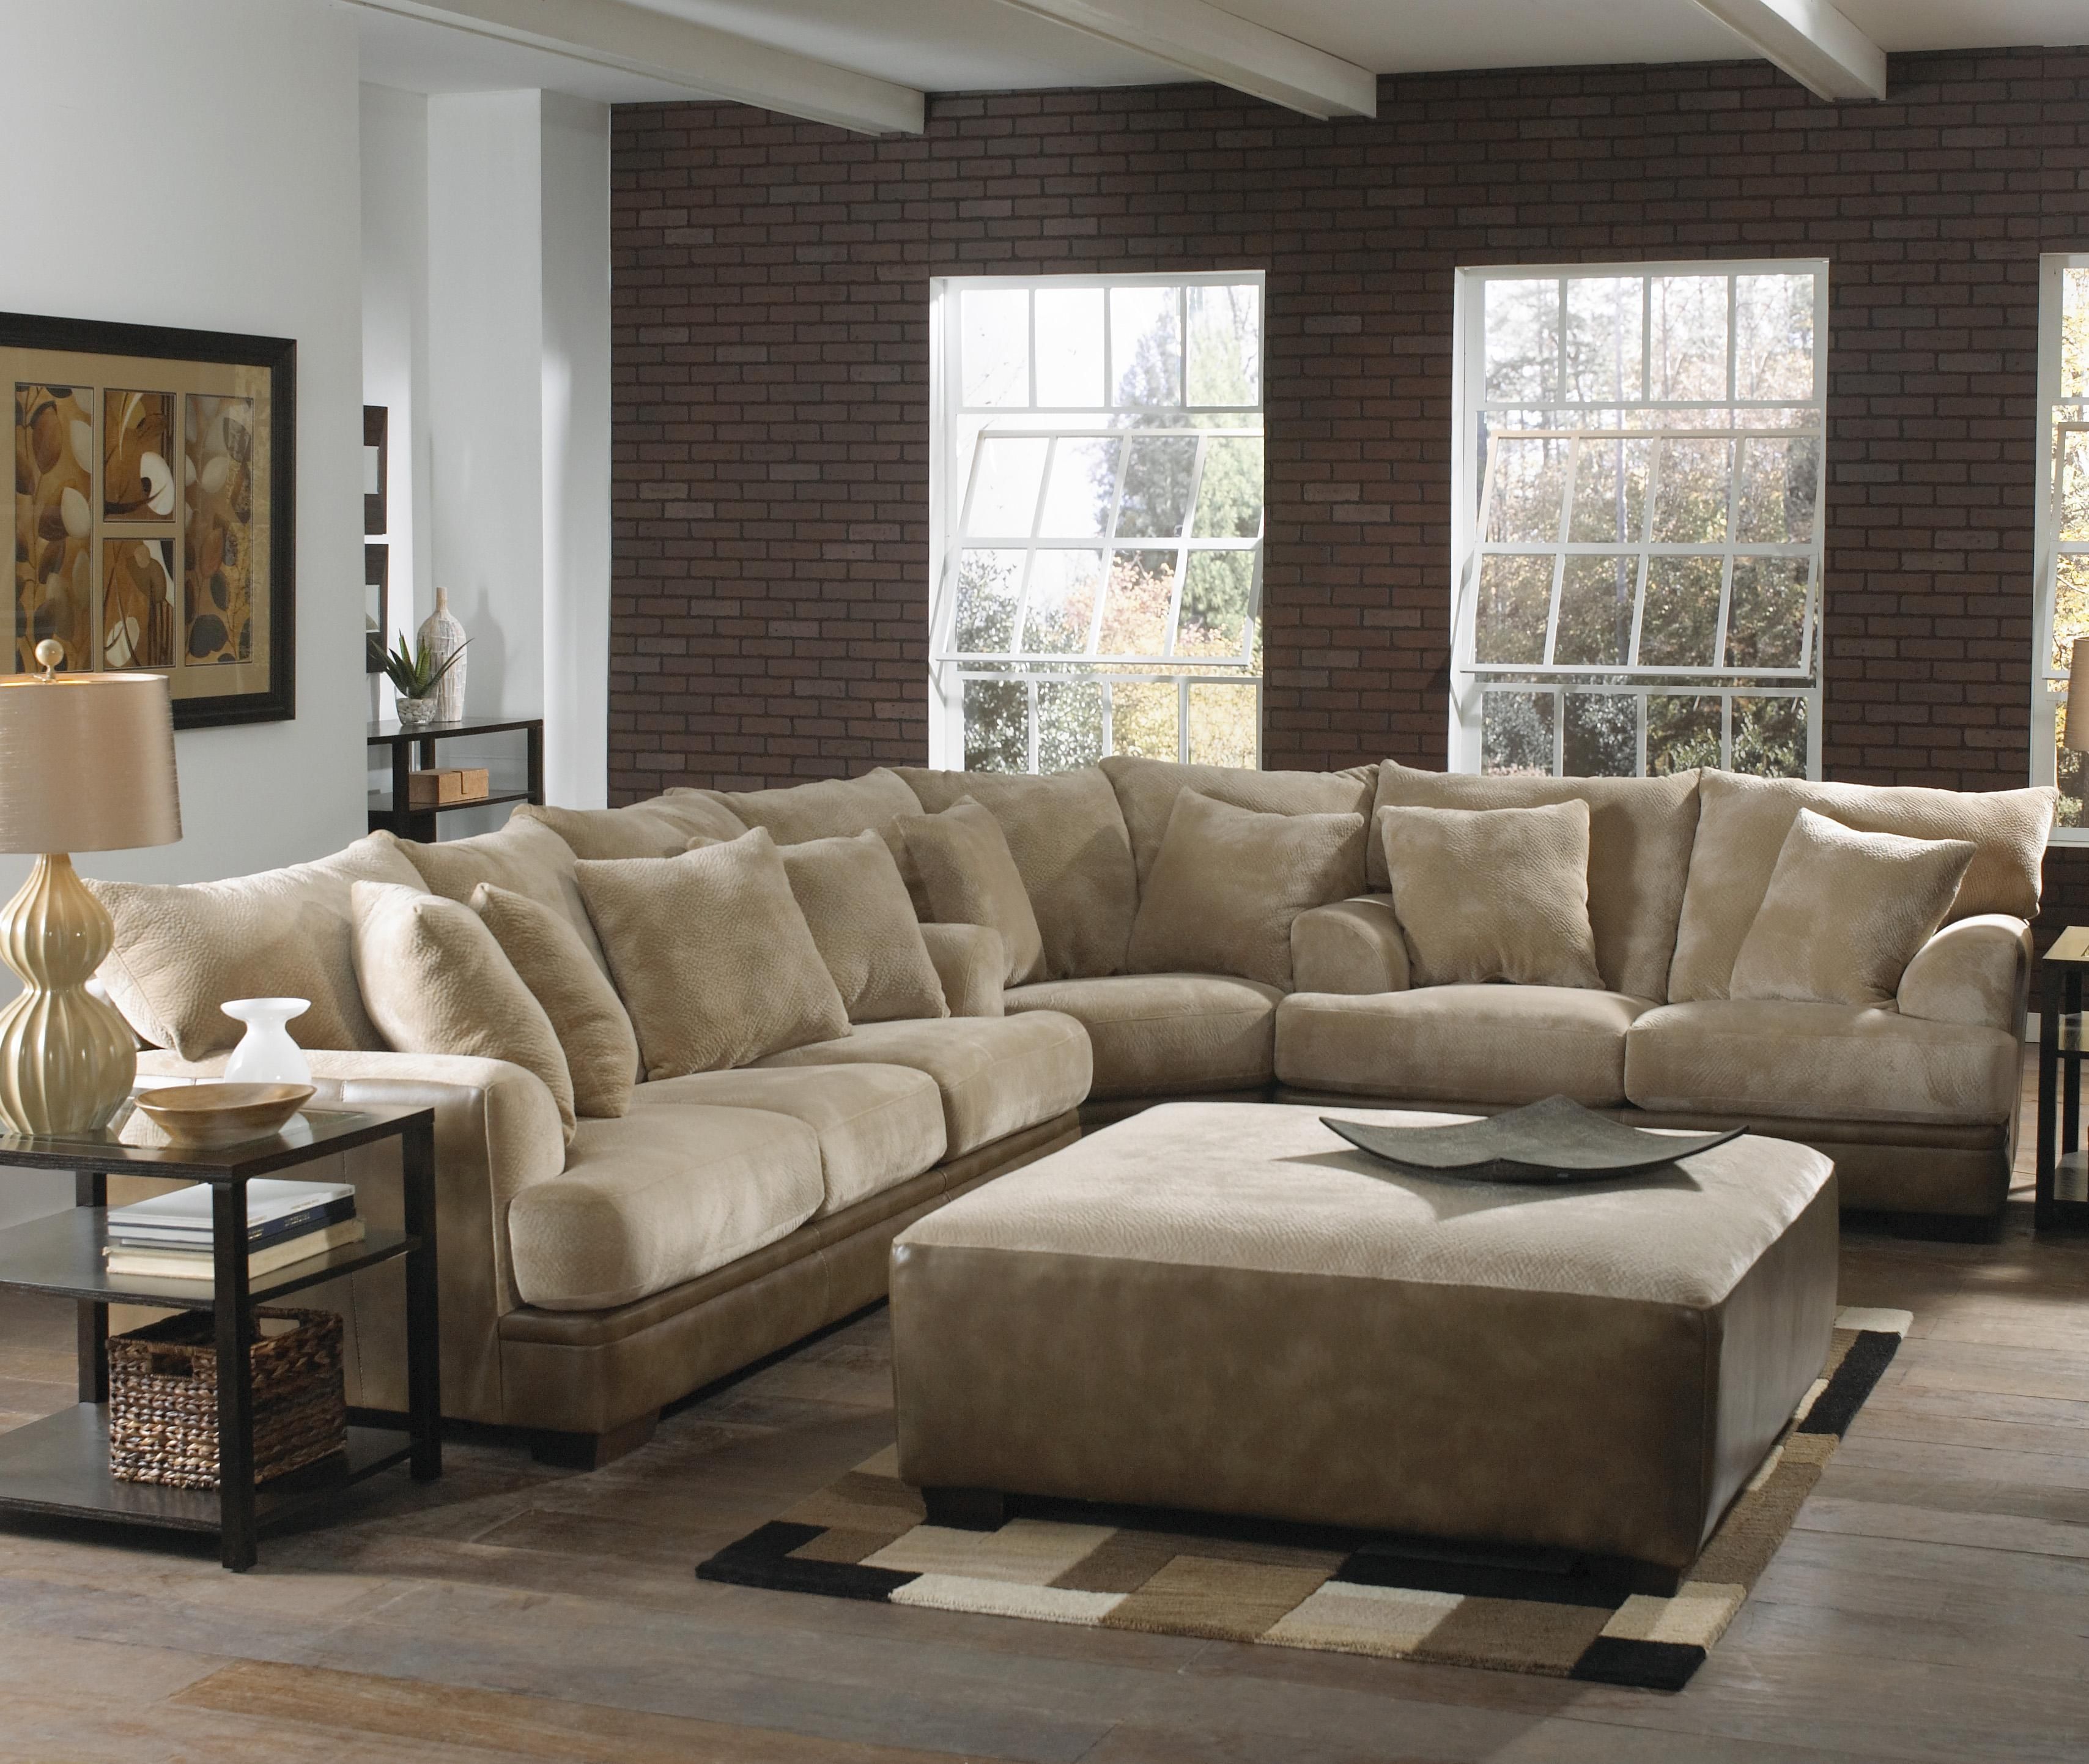 Oversized Sectional Gallery Of The Avoiding Overstuff Room With Extra Large Sectional Sofas (View 5 of 15)